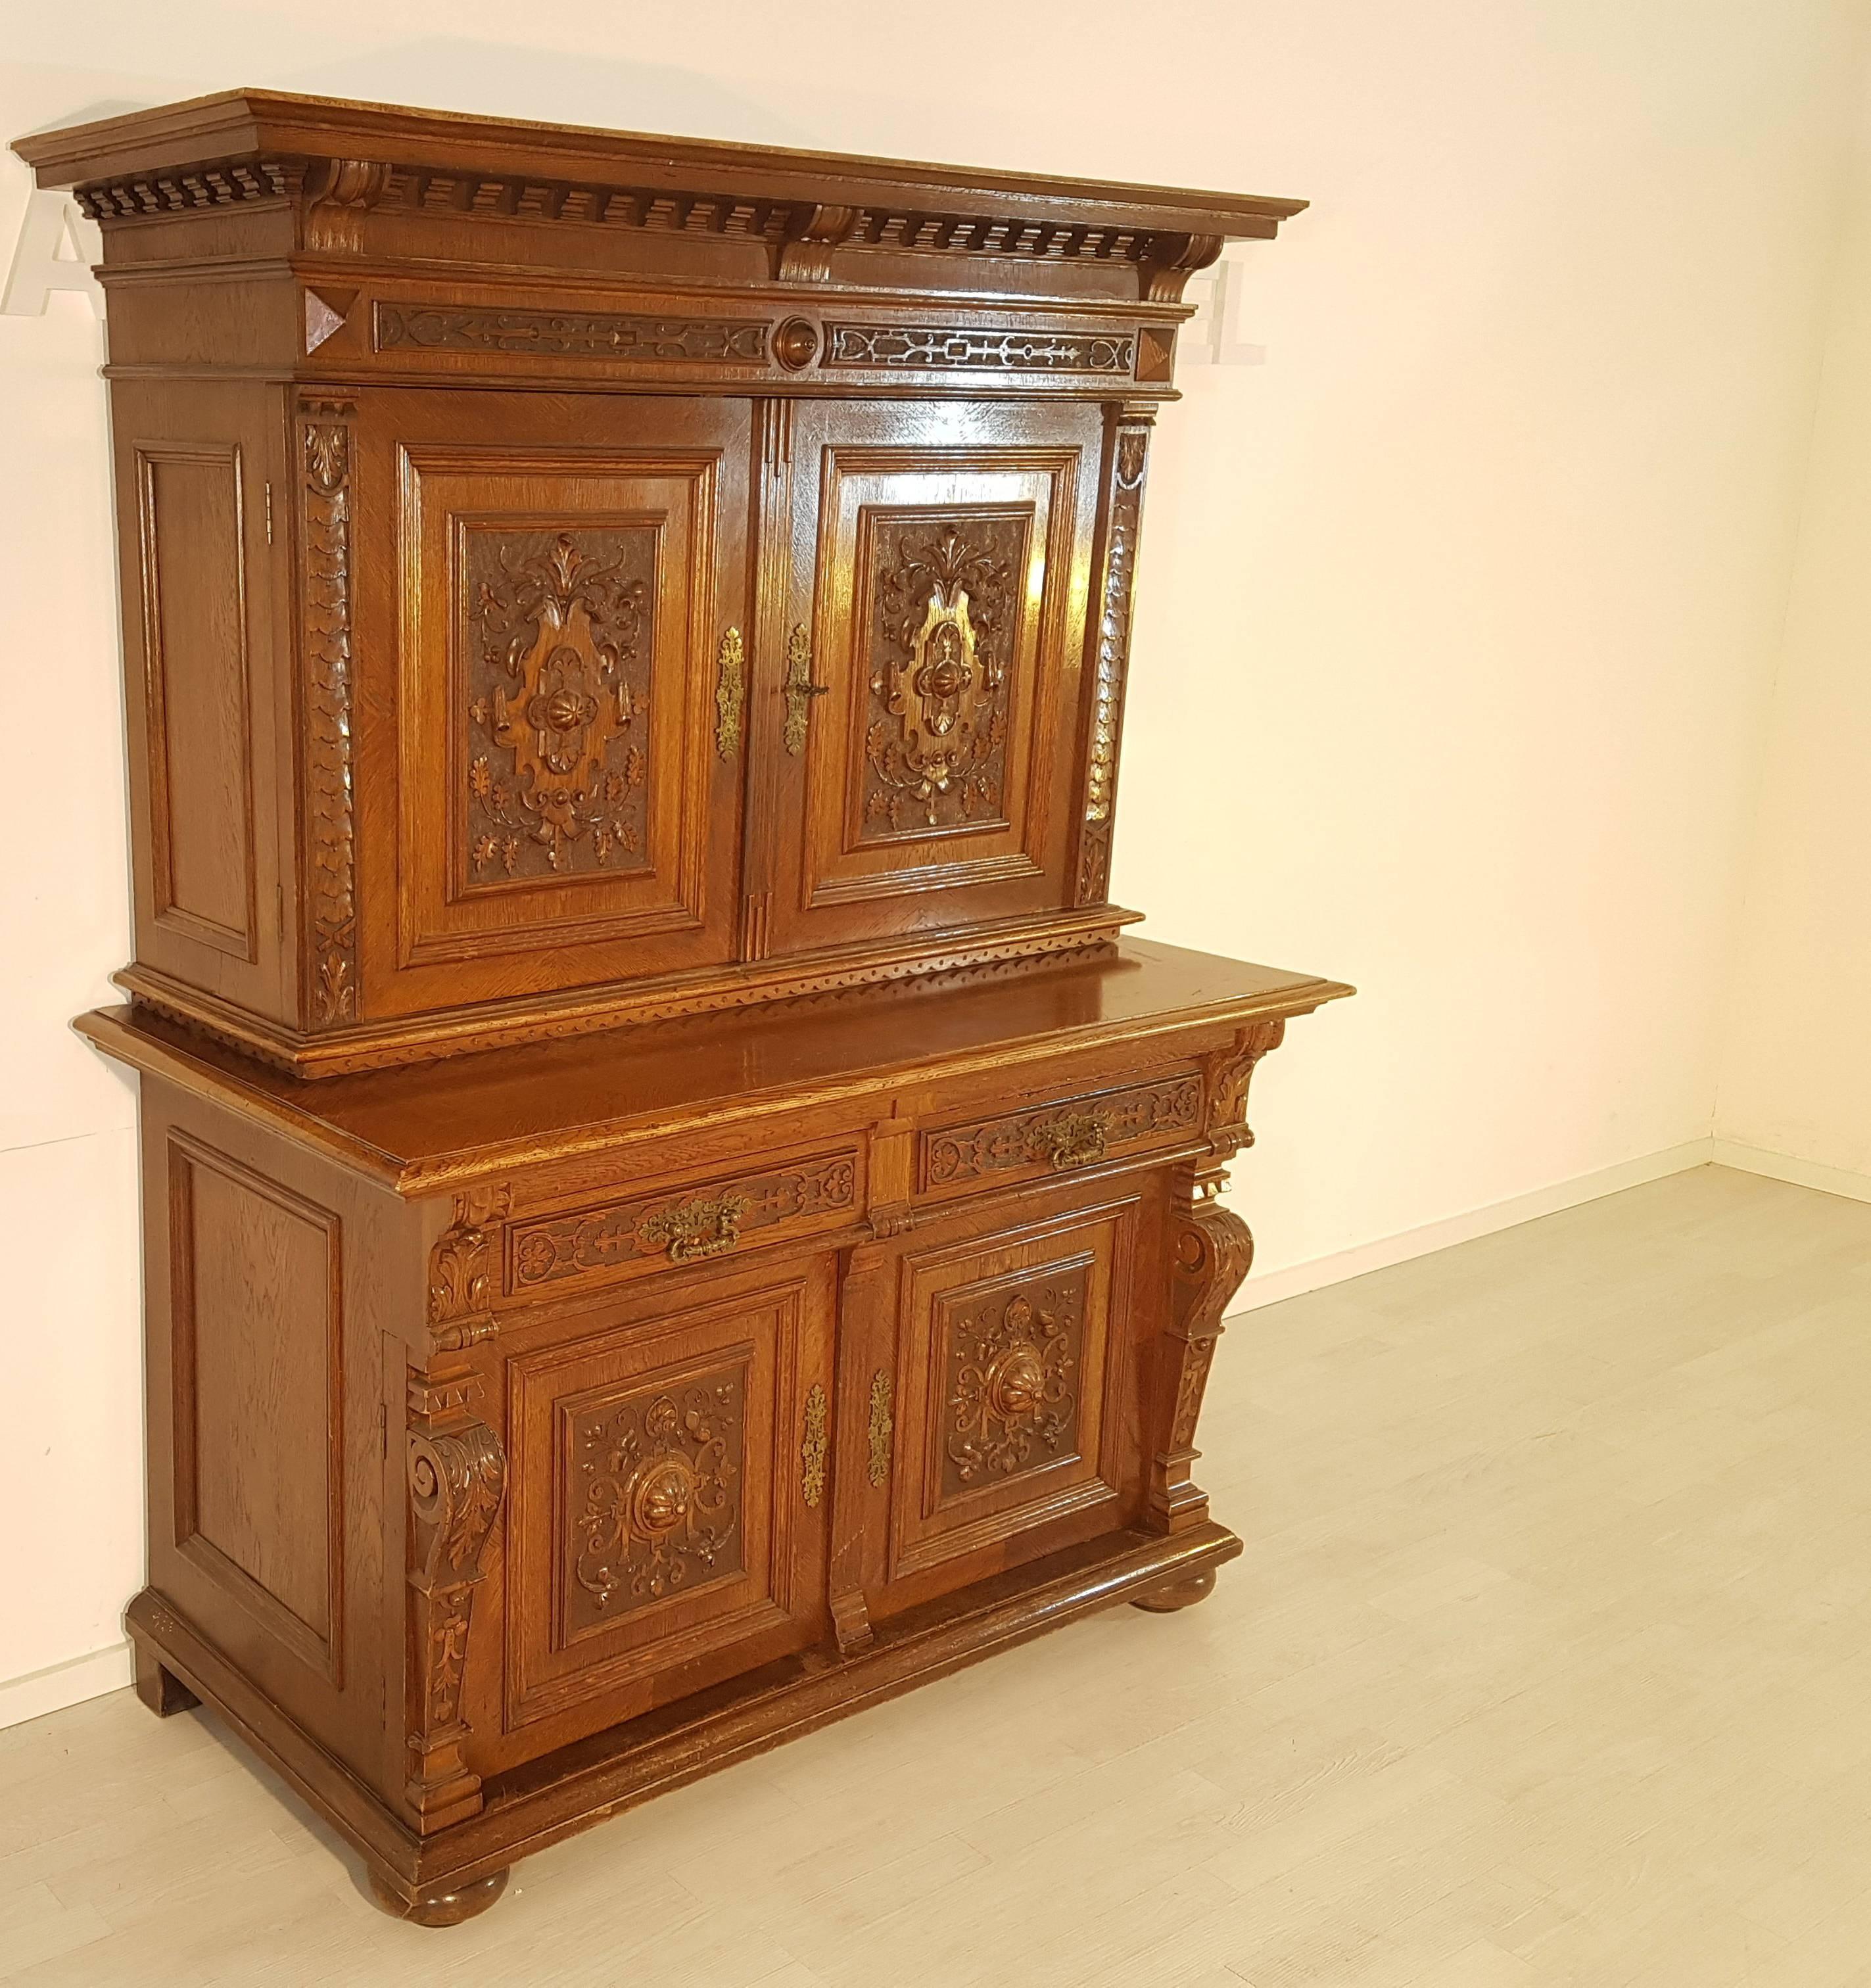 Antique buffet cabinet from the Jugendstil era build, circa 1900. This wonderful piece of furniture has a massive wood constructions and is seperatable into top and lower cabinet. Made out of oak wood and different precious woods for the fine